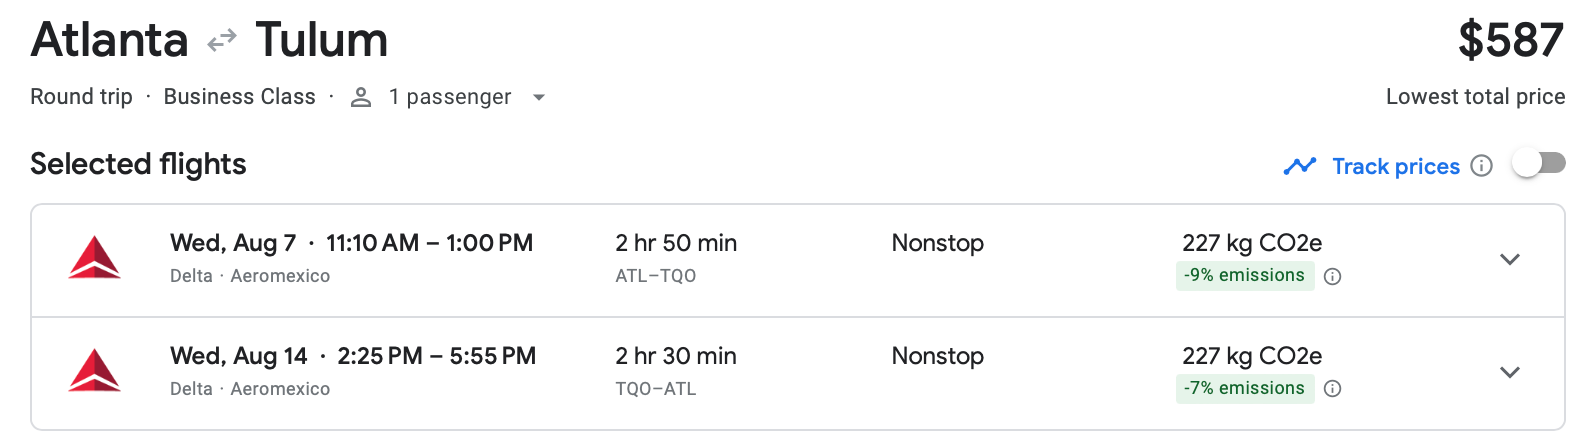 A screenshot of the Google Flights estimate for a round-trip, business class flight from Atlanta to Tulum.